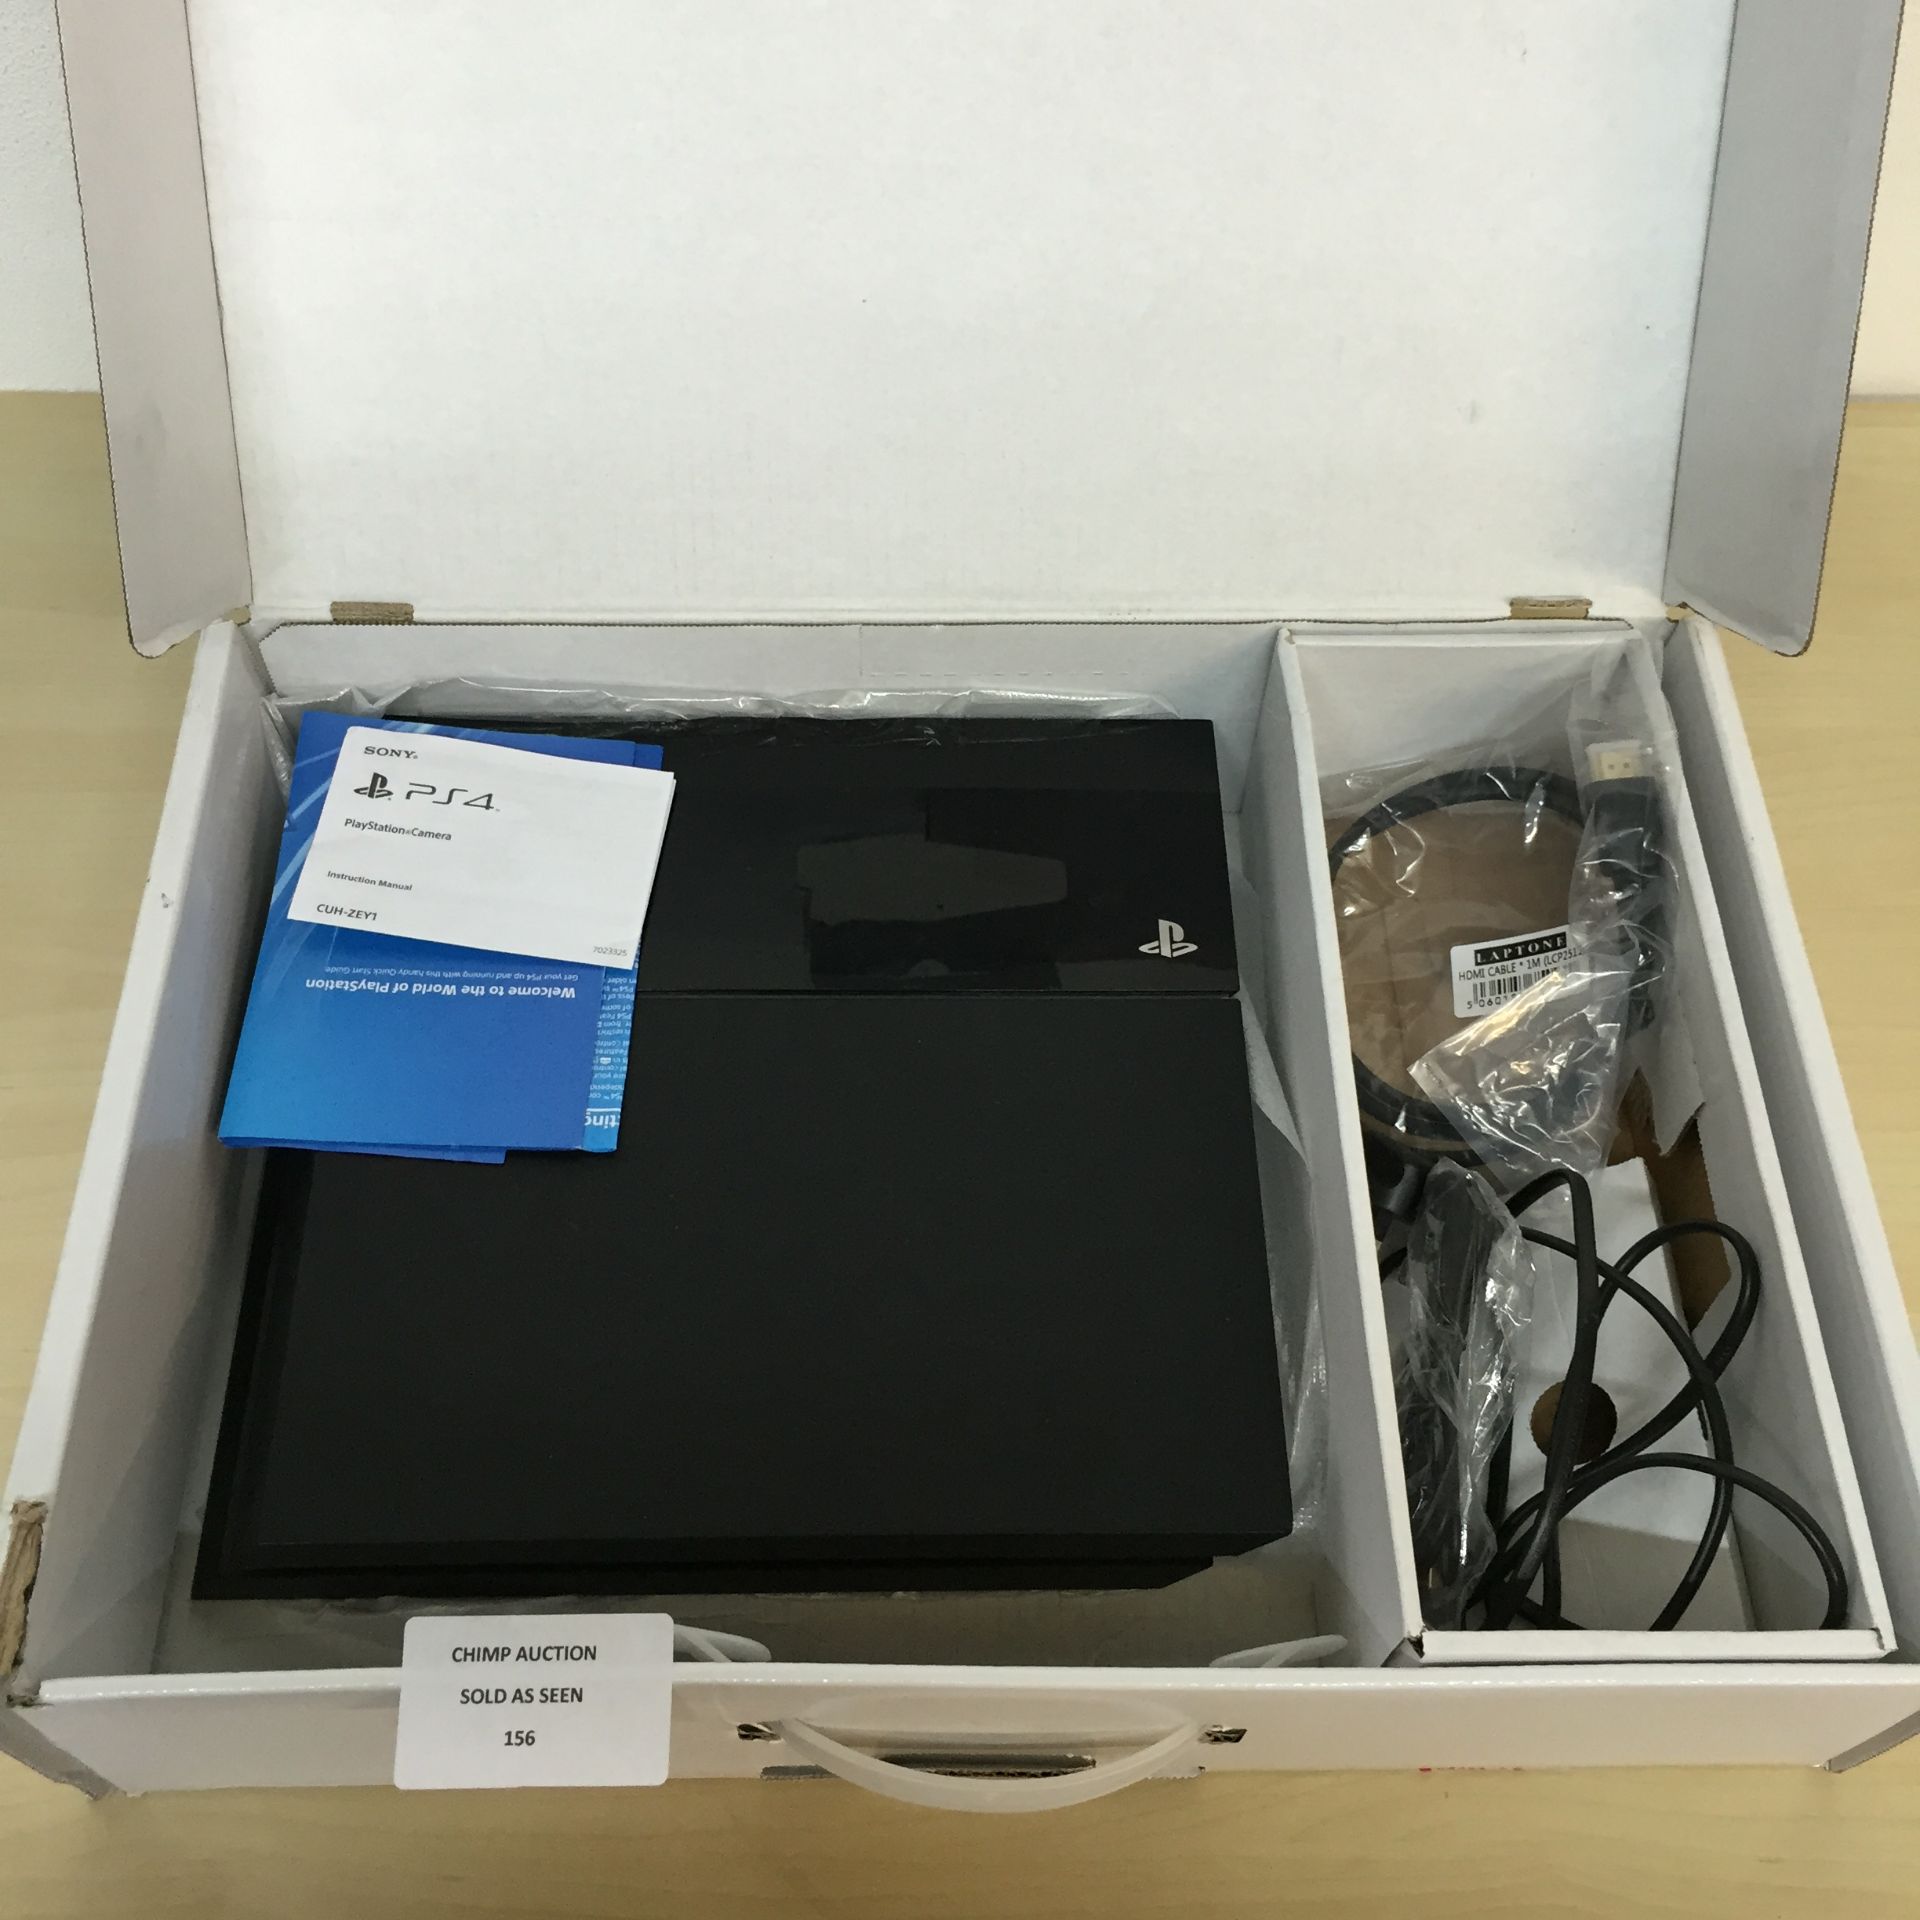 BOXED SONY PS4 500GB CONSOLE RETAIL RETURN